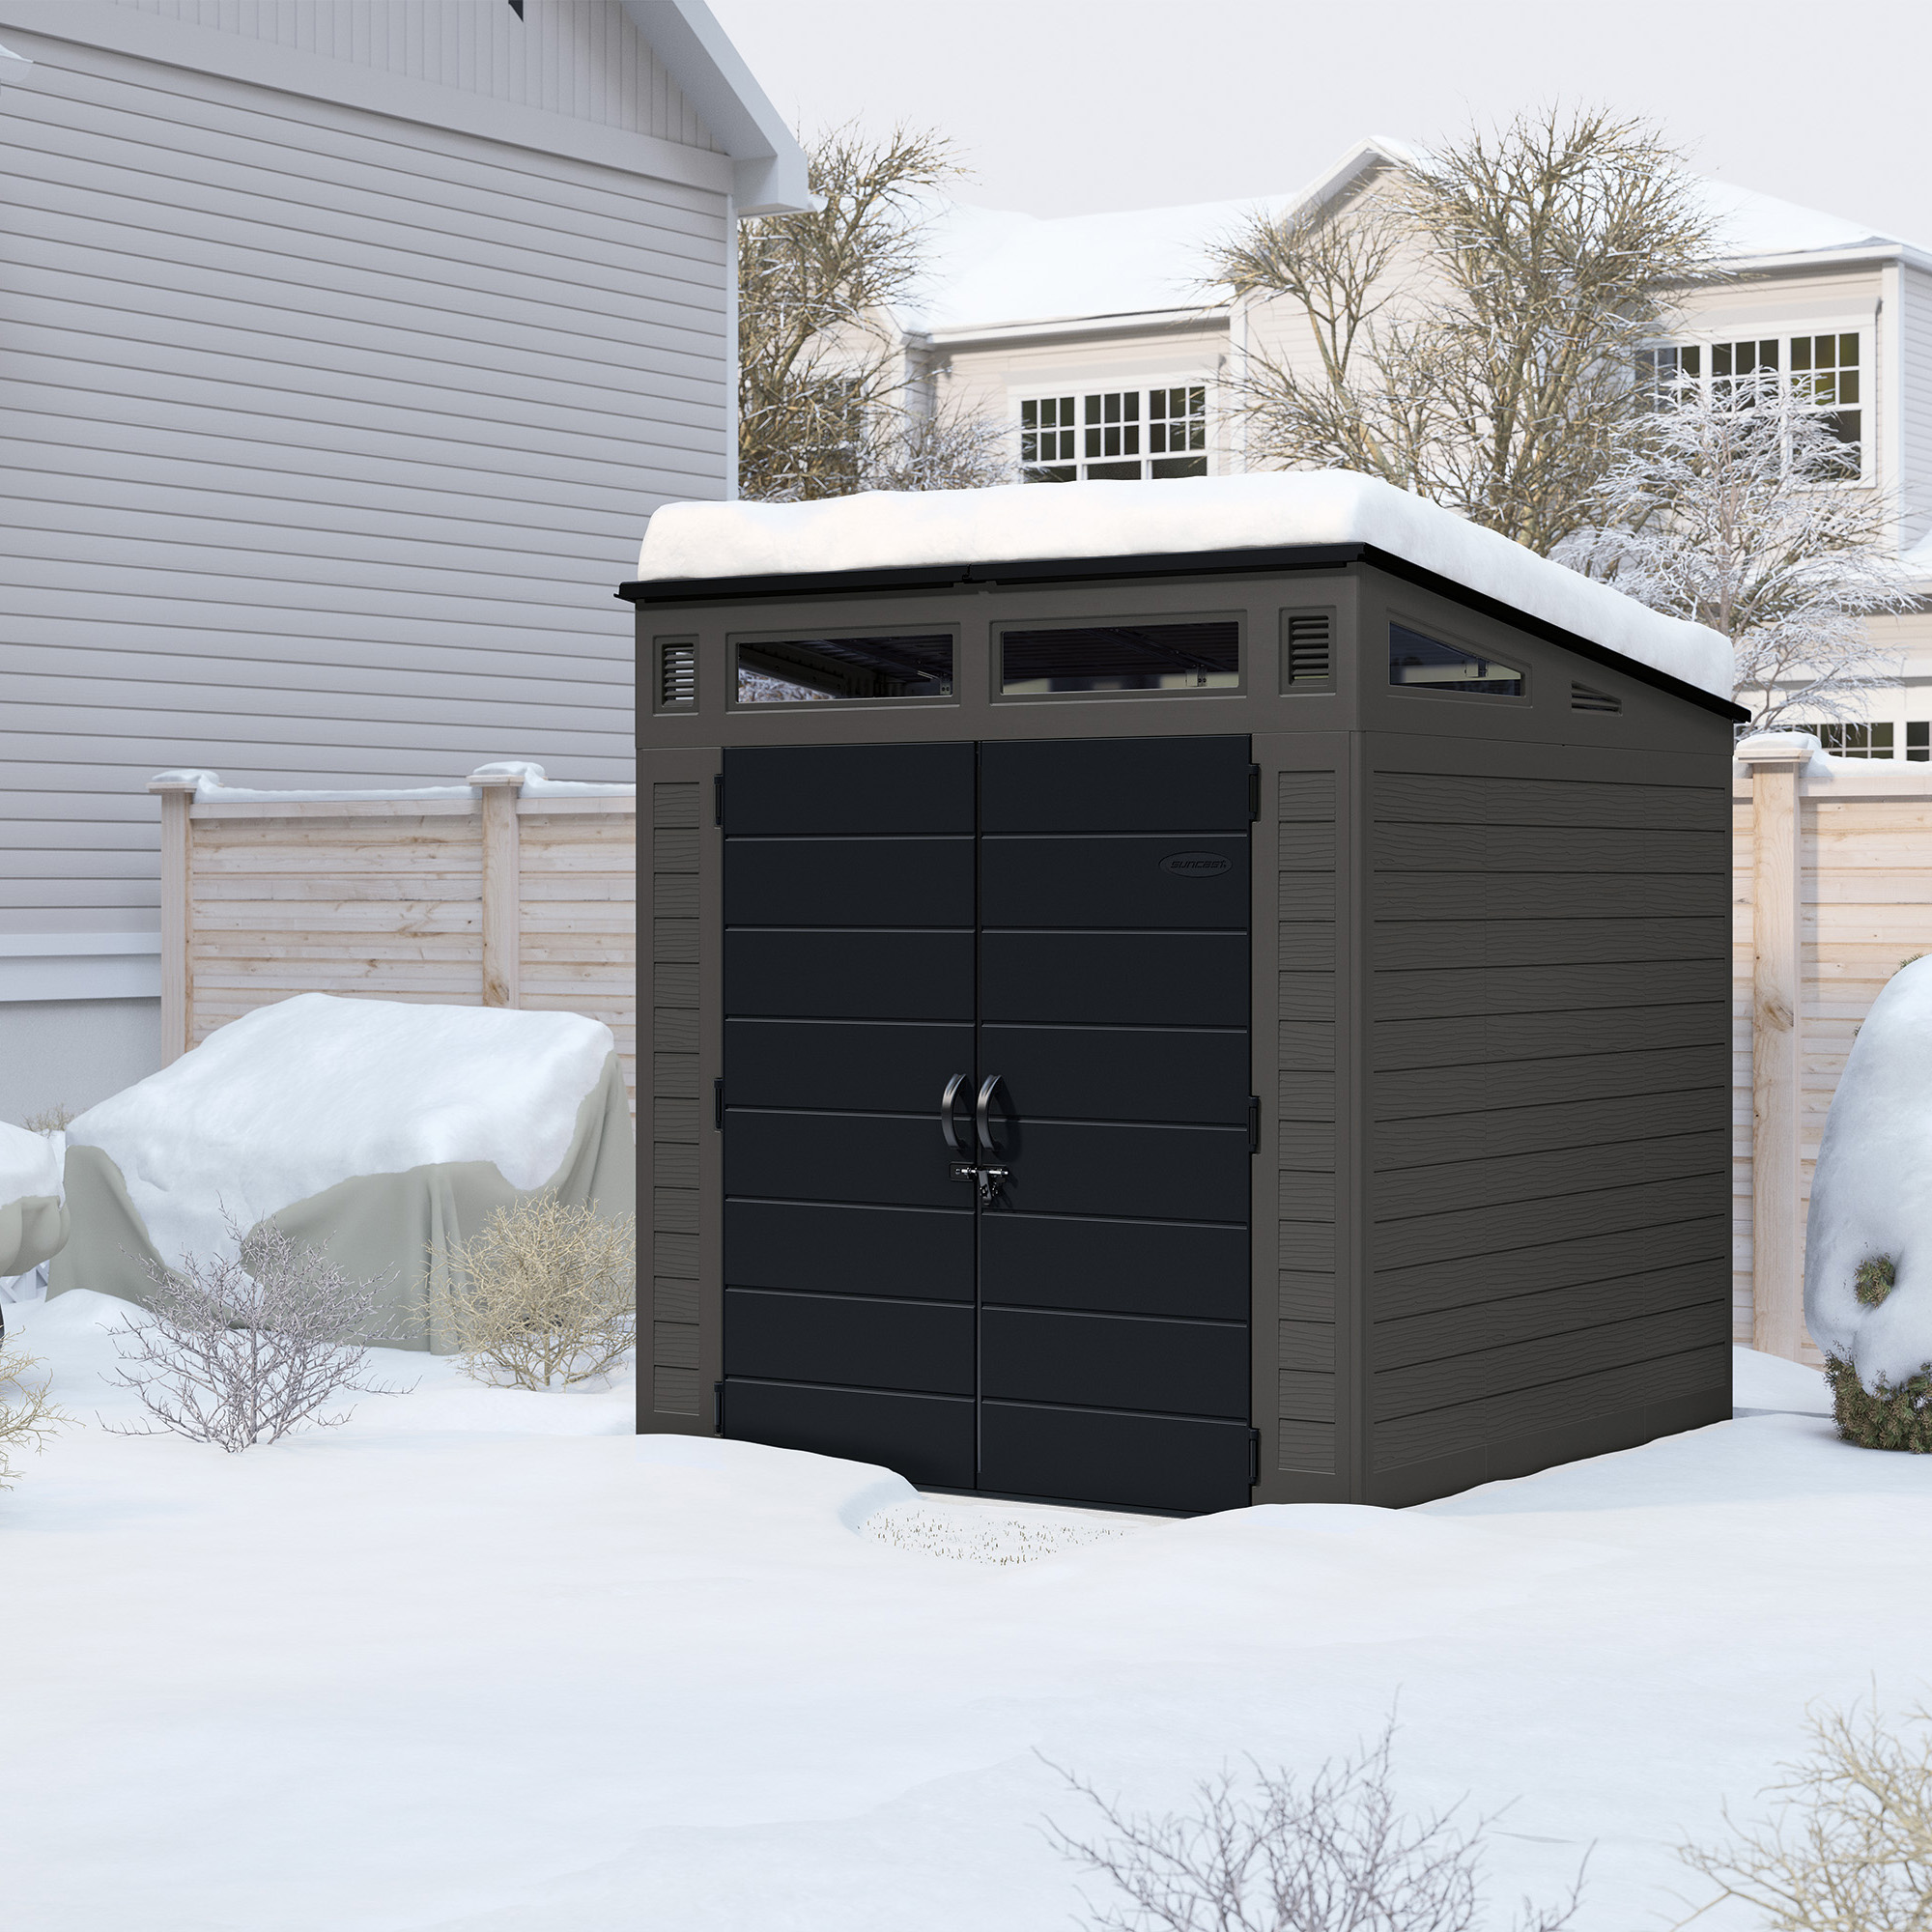 Suncast Resin Modernist Outdoor Storage Shed, Black and Gray, 86.5 in D x 89.5 in H x 87.5 in W - image 2 of 5